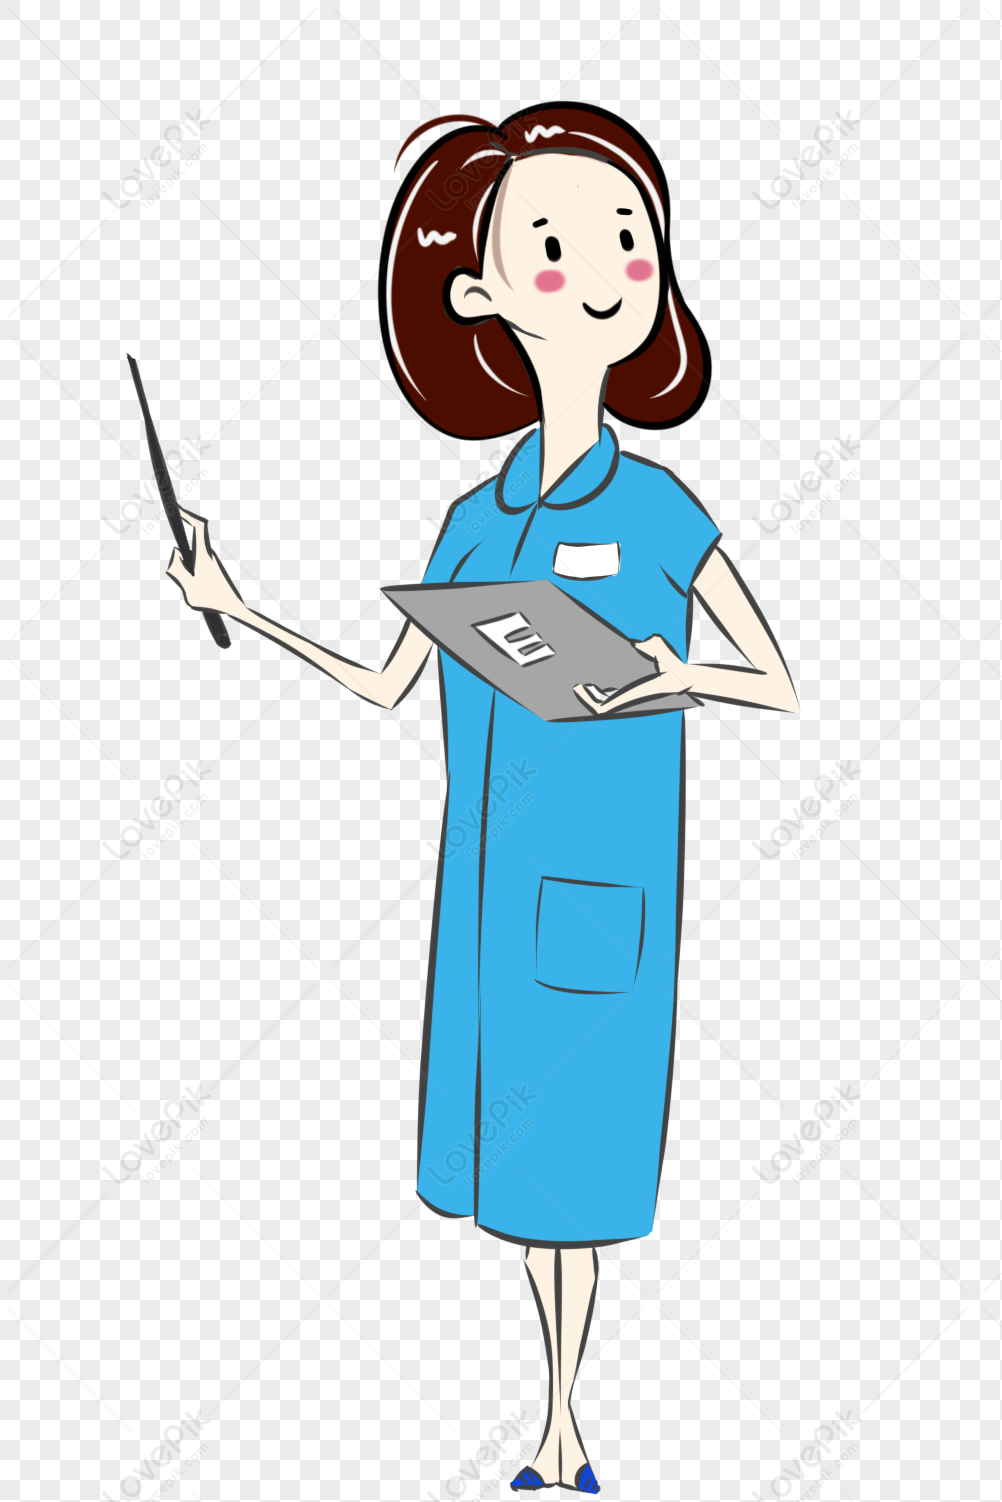 Female Doctor Cartoon Hand Drawn Free PNG And Clipart Image For Free  Download - Lovepik | 401357229